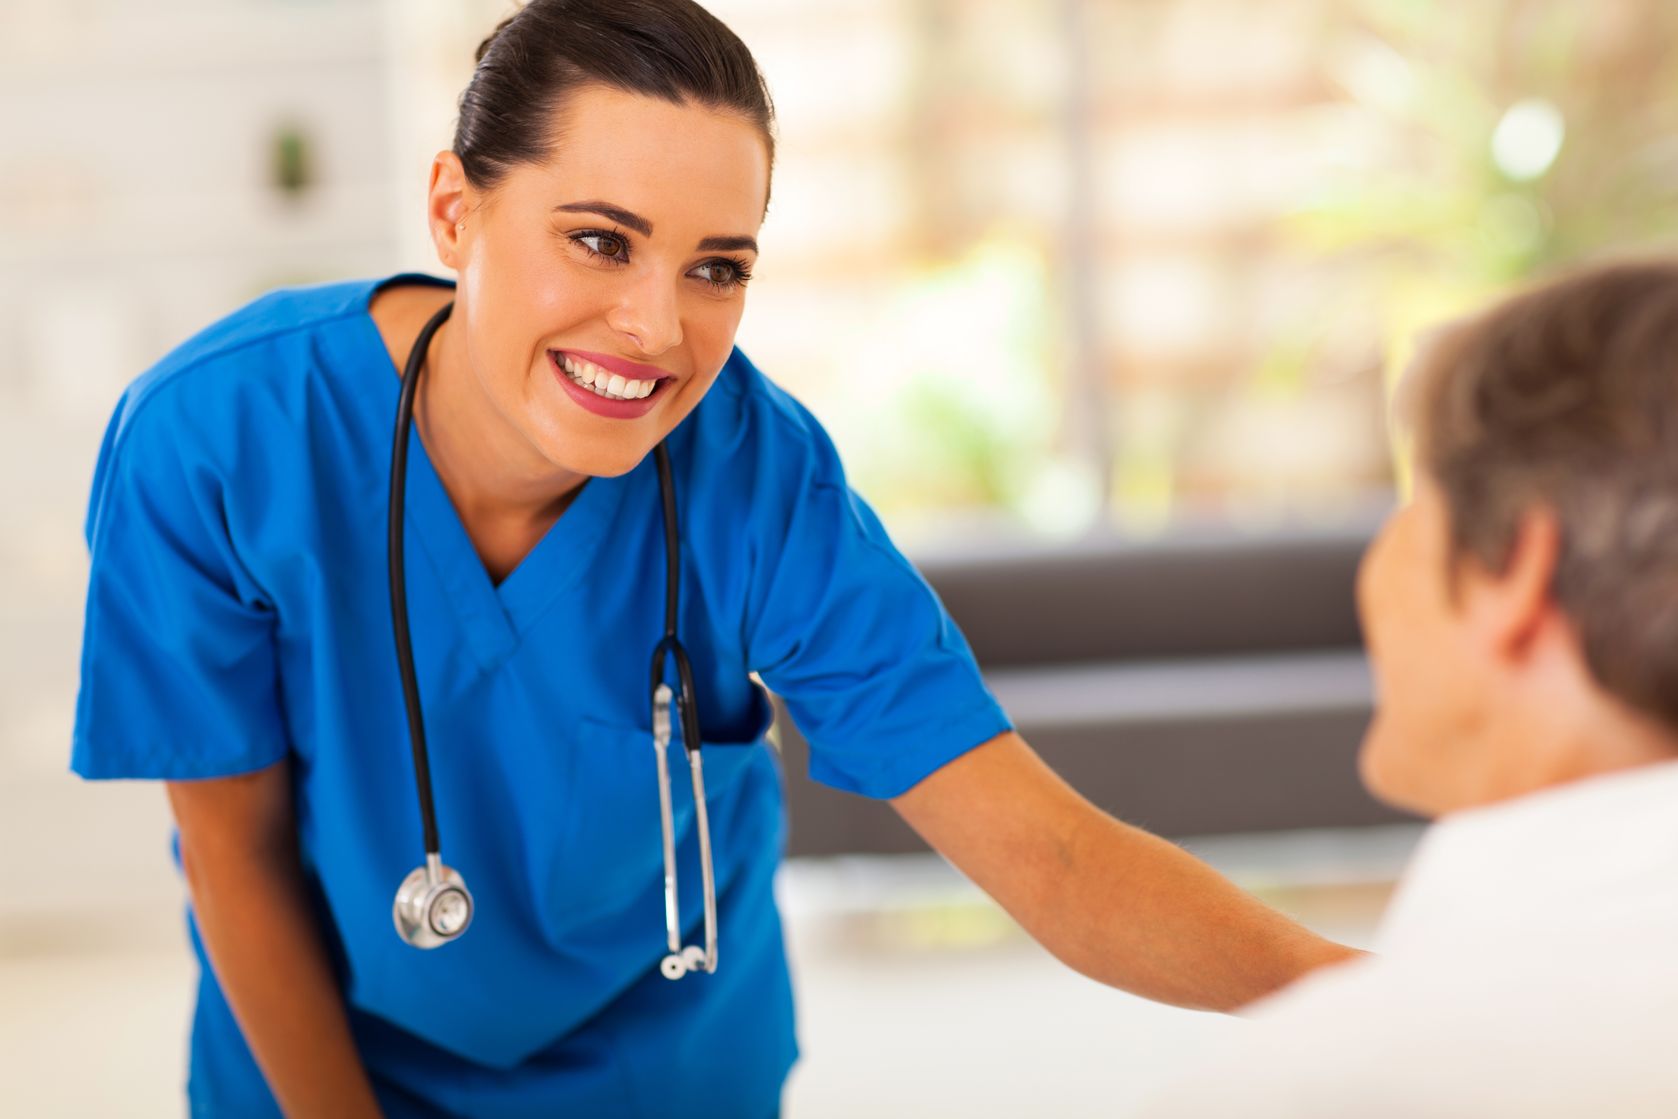 Nursing Degrees and Certificates in the Health Career Field